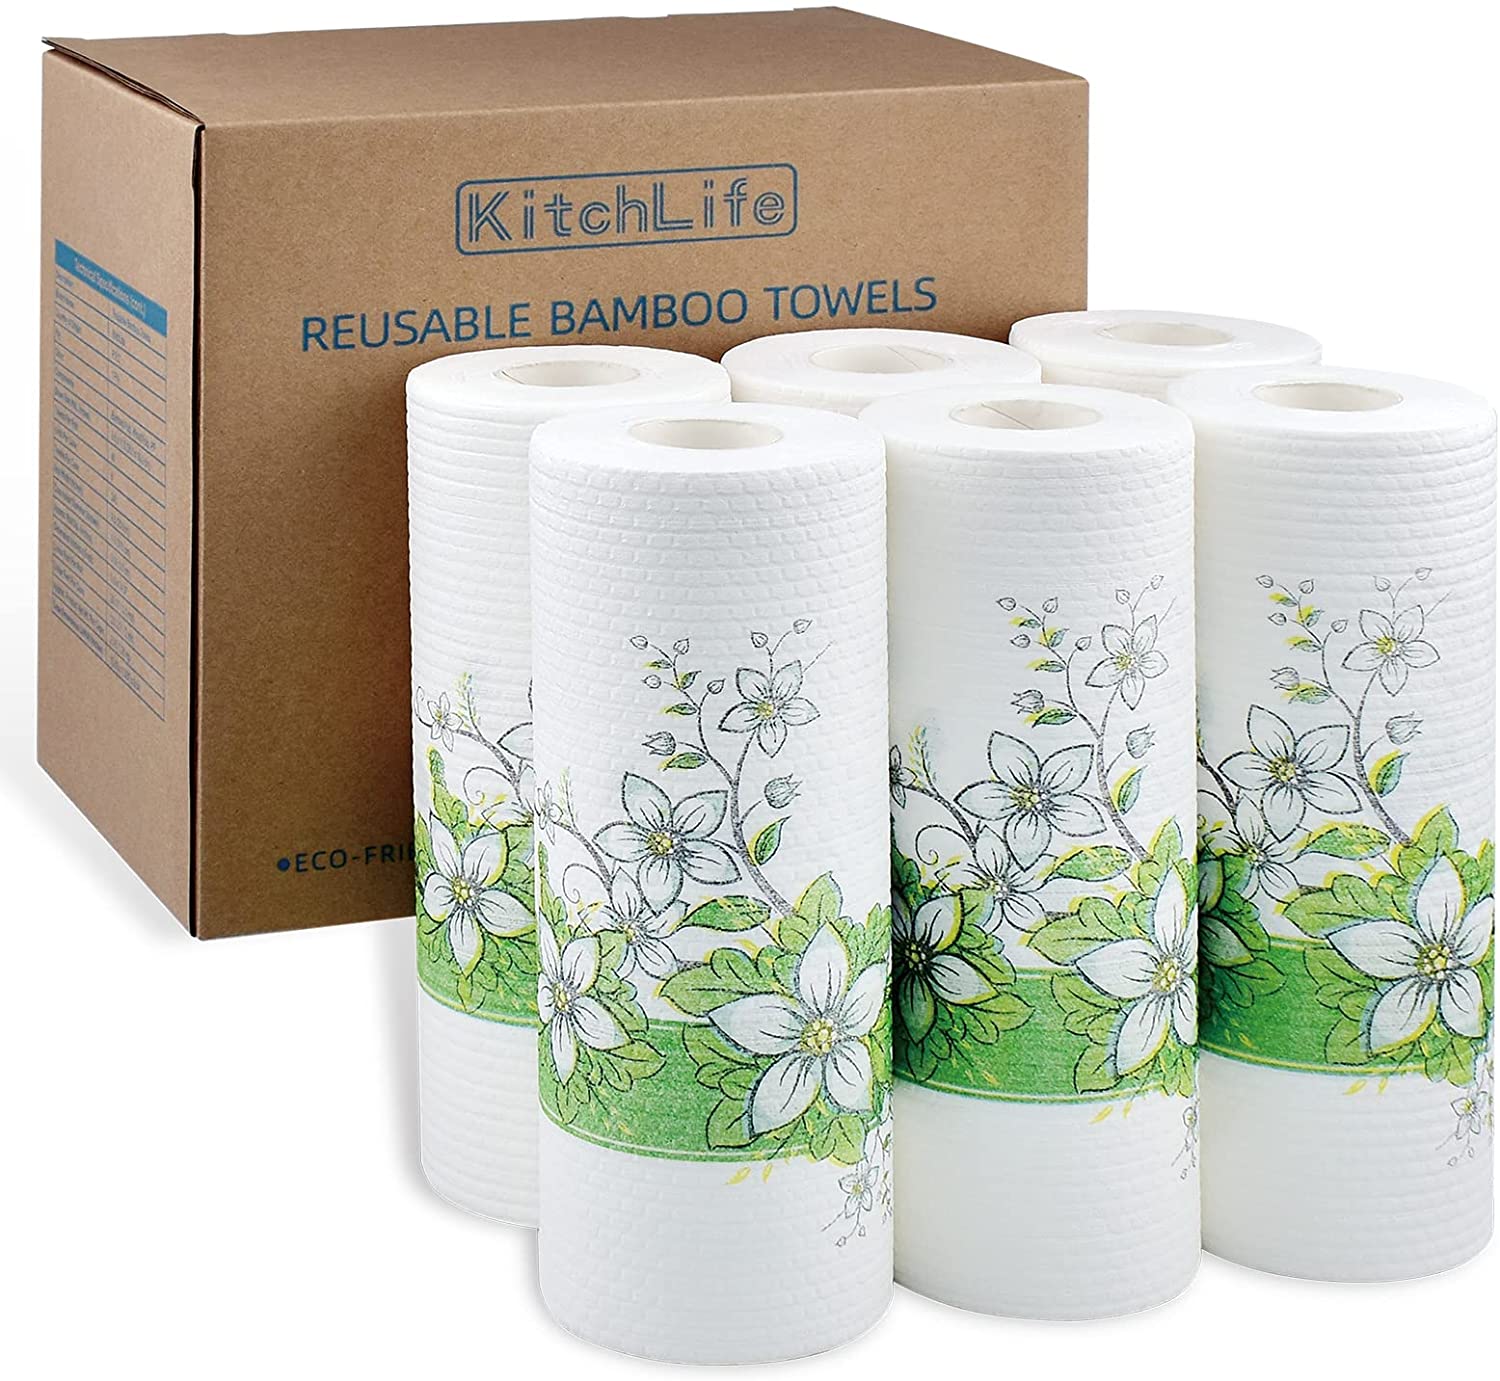 Reusable Bamboo Toilet Paper Roll